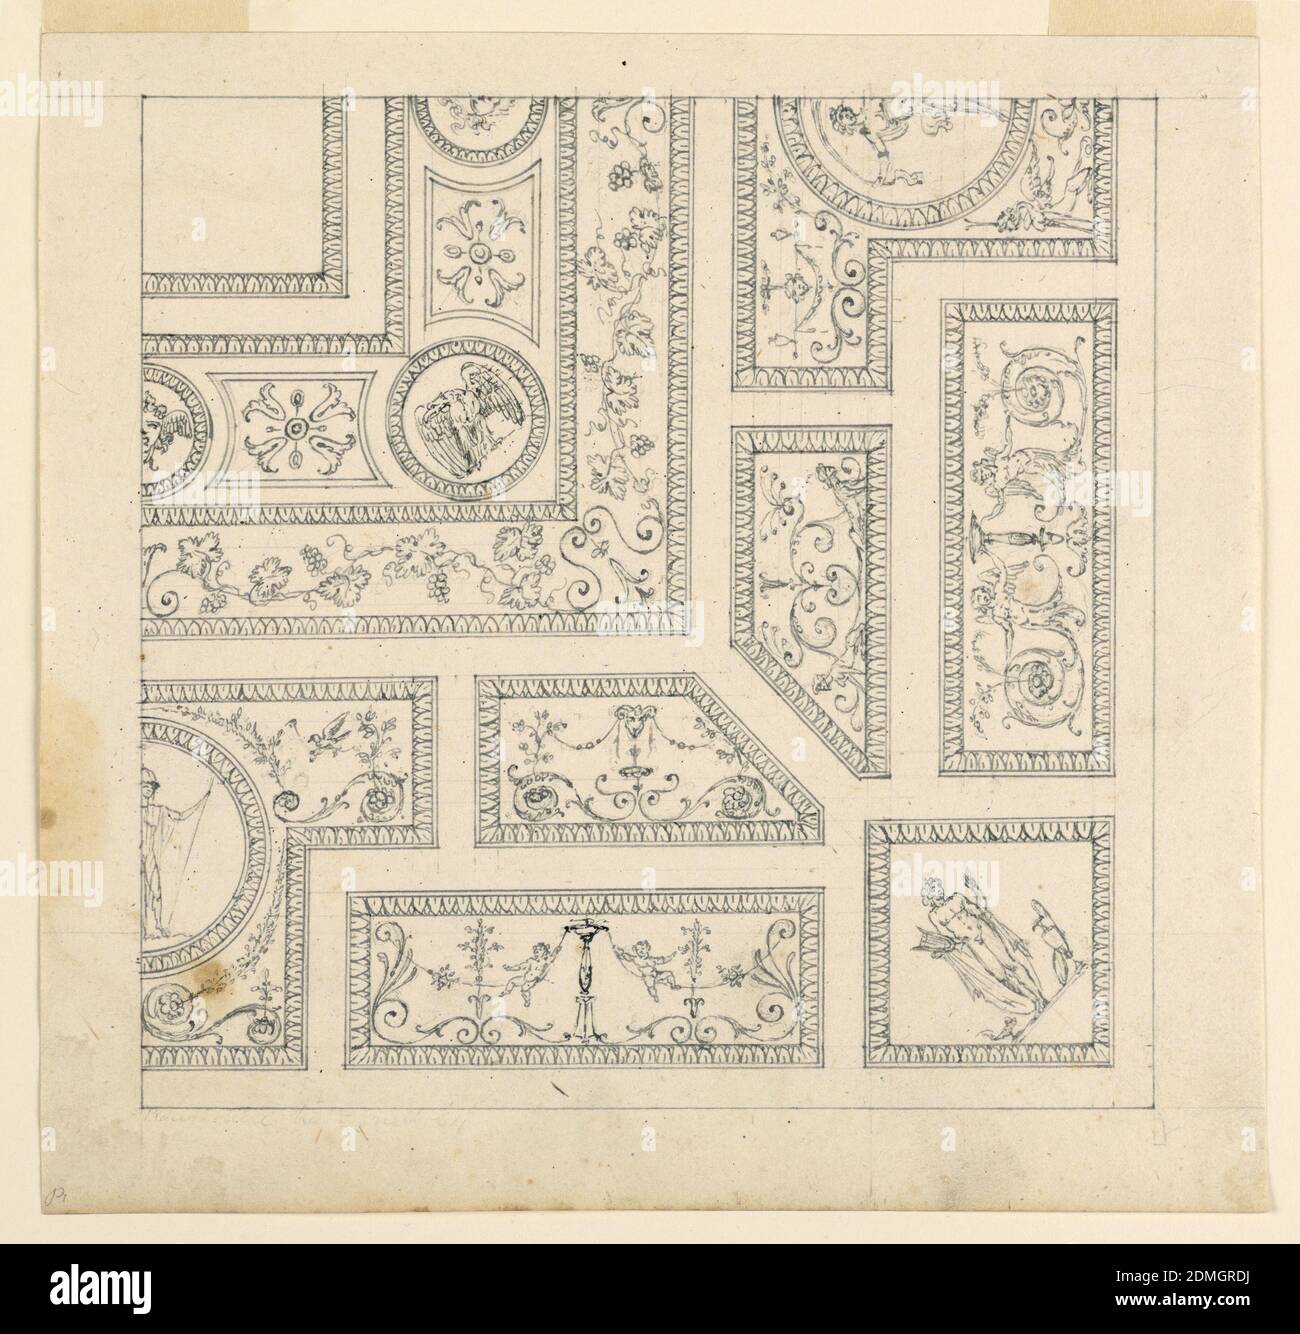 Project for a Ceiling, Graphite, pen and ink on paper, Portion of a ceiling shown divided into small panels, each with a grotesque. At the corner, a square panel with a classical figure. In the opposite corner, a roundel with an eagle., Italy, ca. 1780, ornament, Drawing Stock Photo